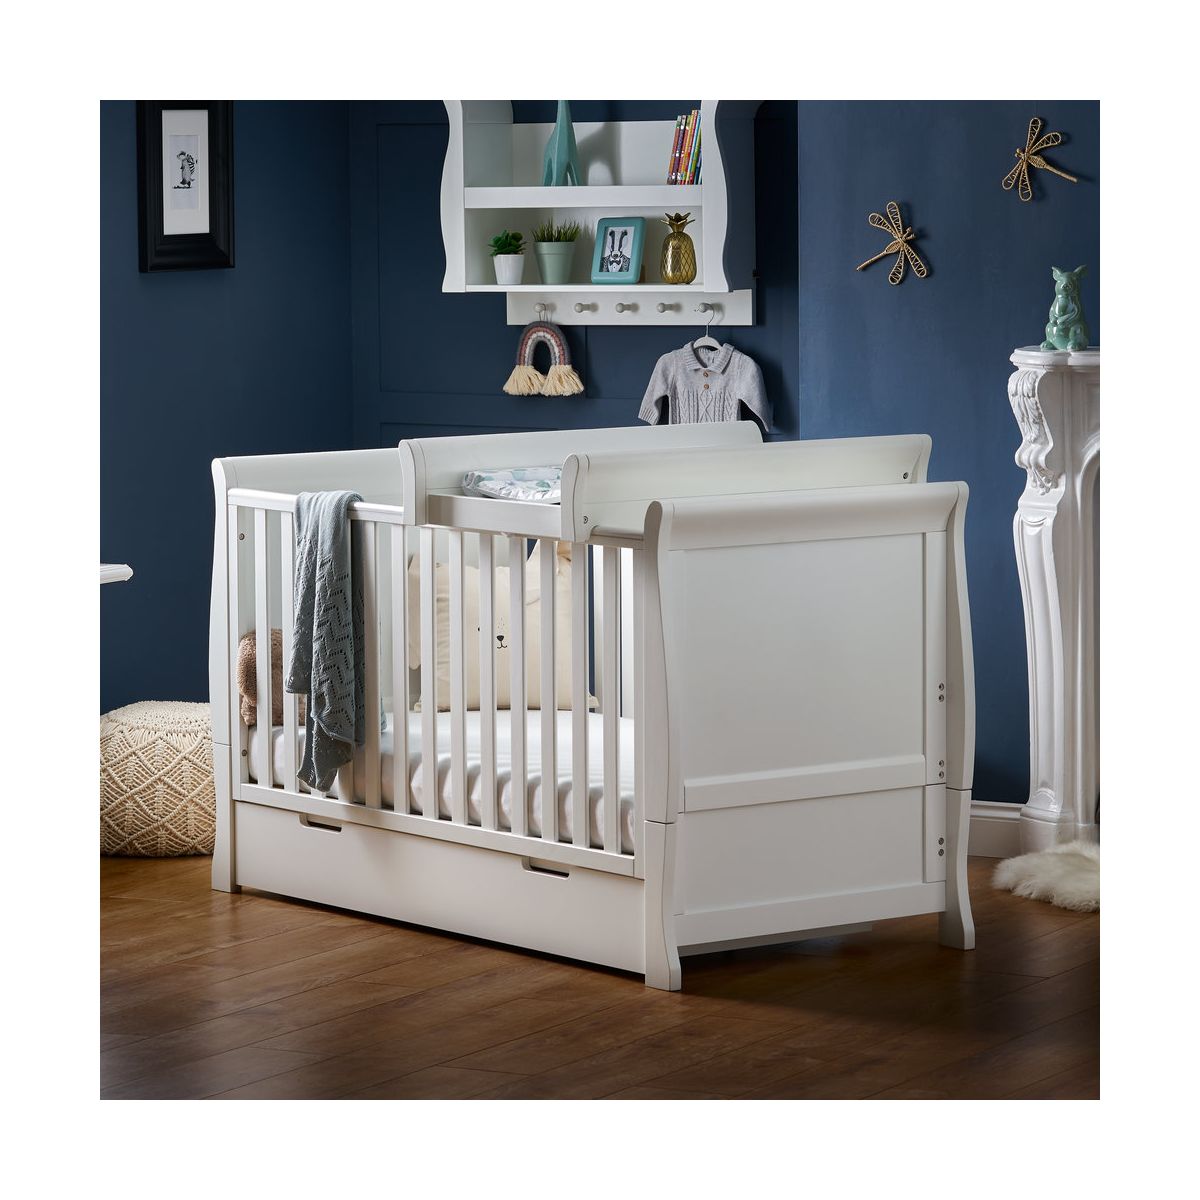 Obaby Stamford Classic Sleigh Cot Bed Including Underbed Drawer